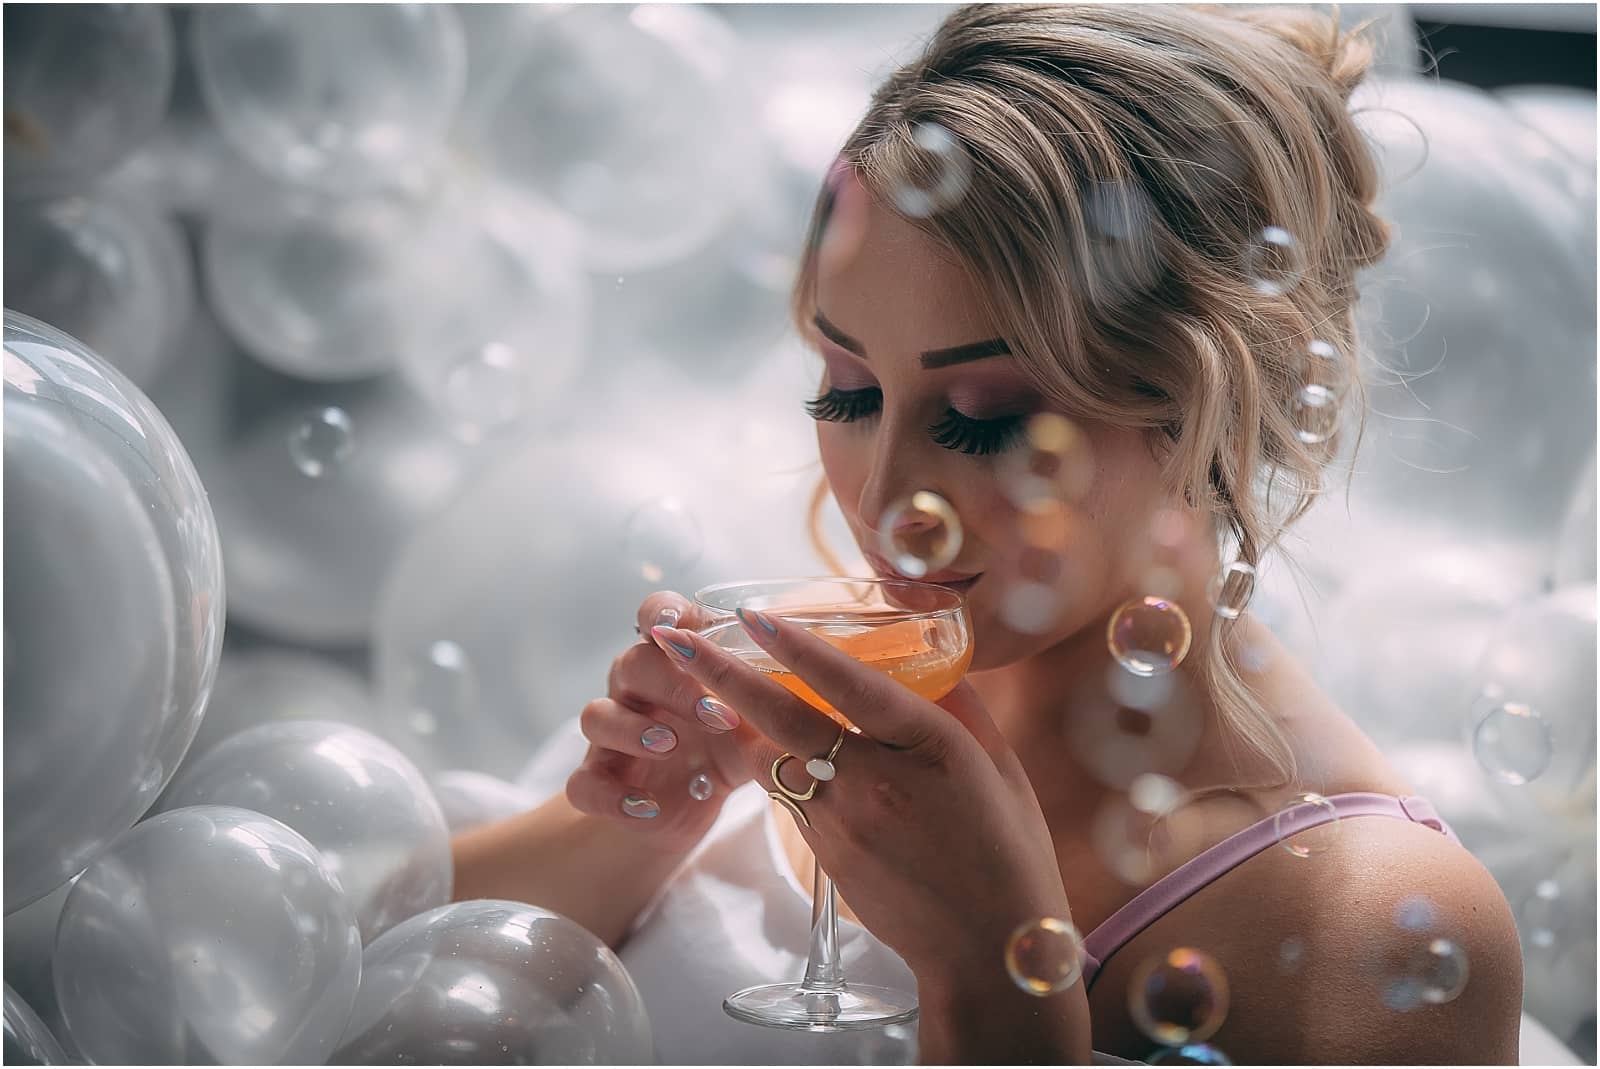 Calgary Boudoir Special Event - Balloons, Bubbles and Bathtubs as a set for Boudoir Photo Sessions